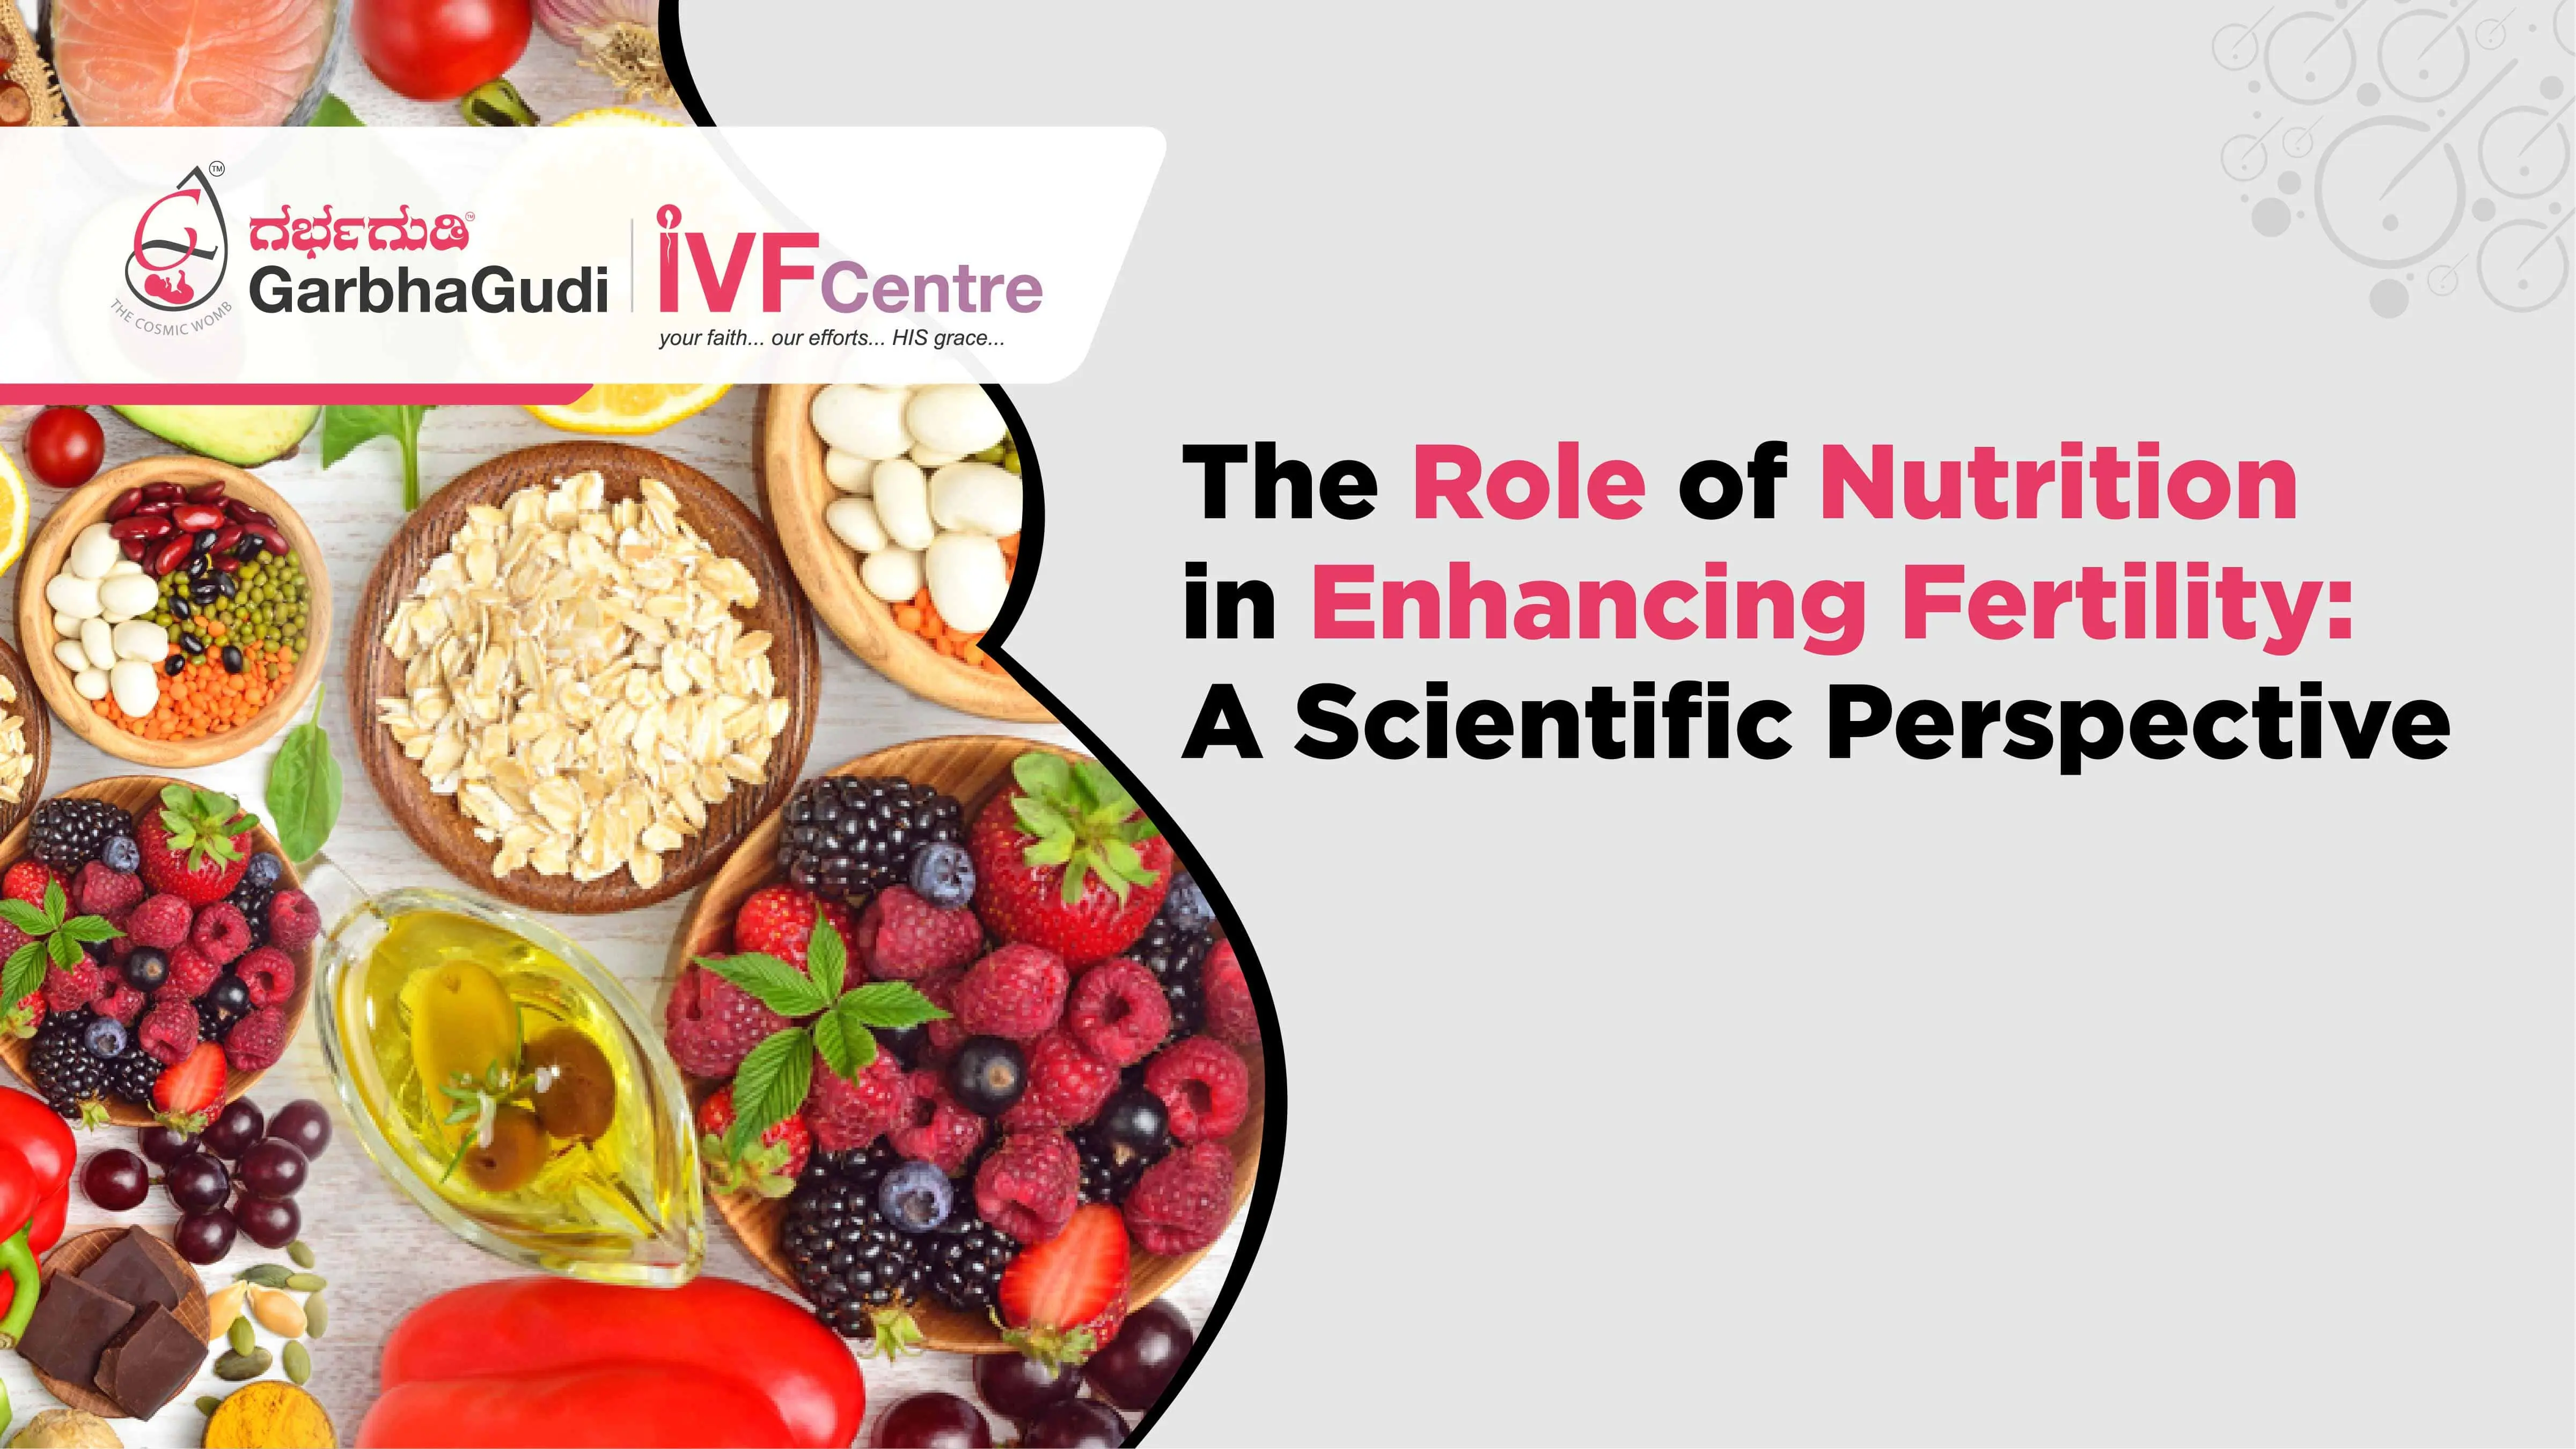 The Role of Nutrition in Enhancing Fertility: A Scientific Perspective